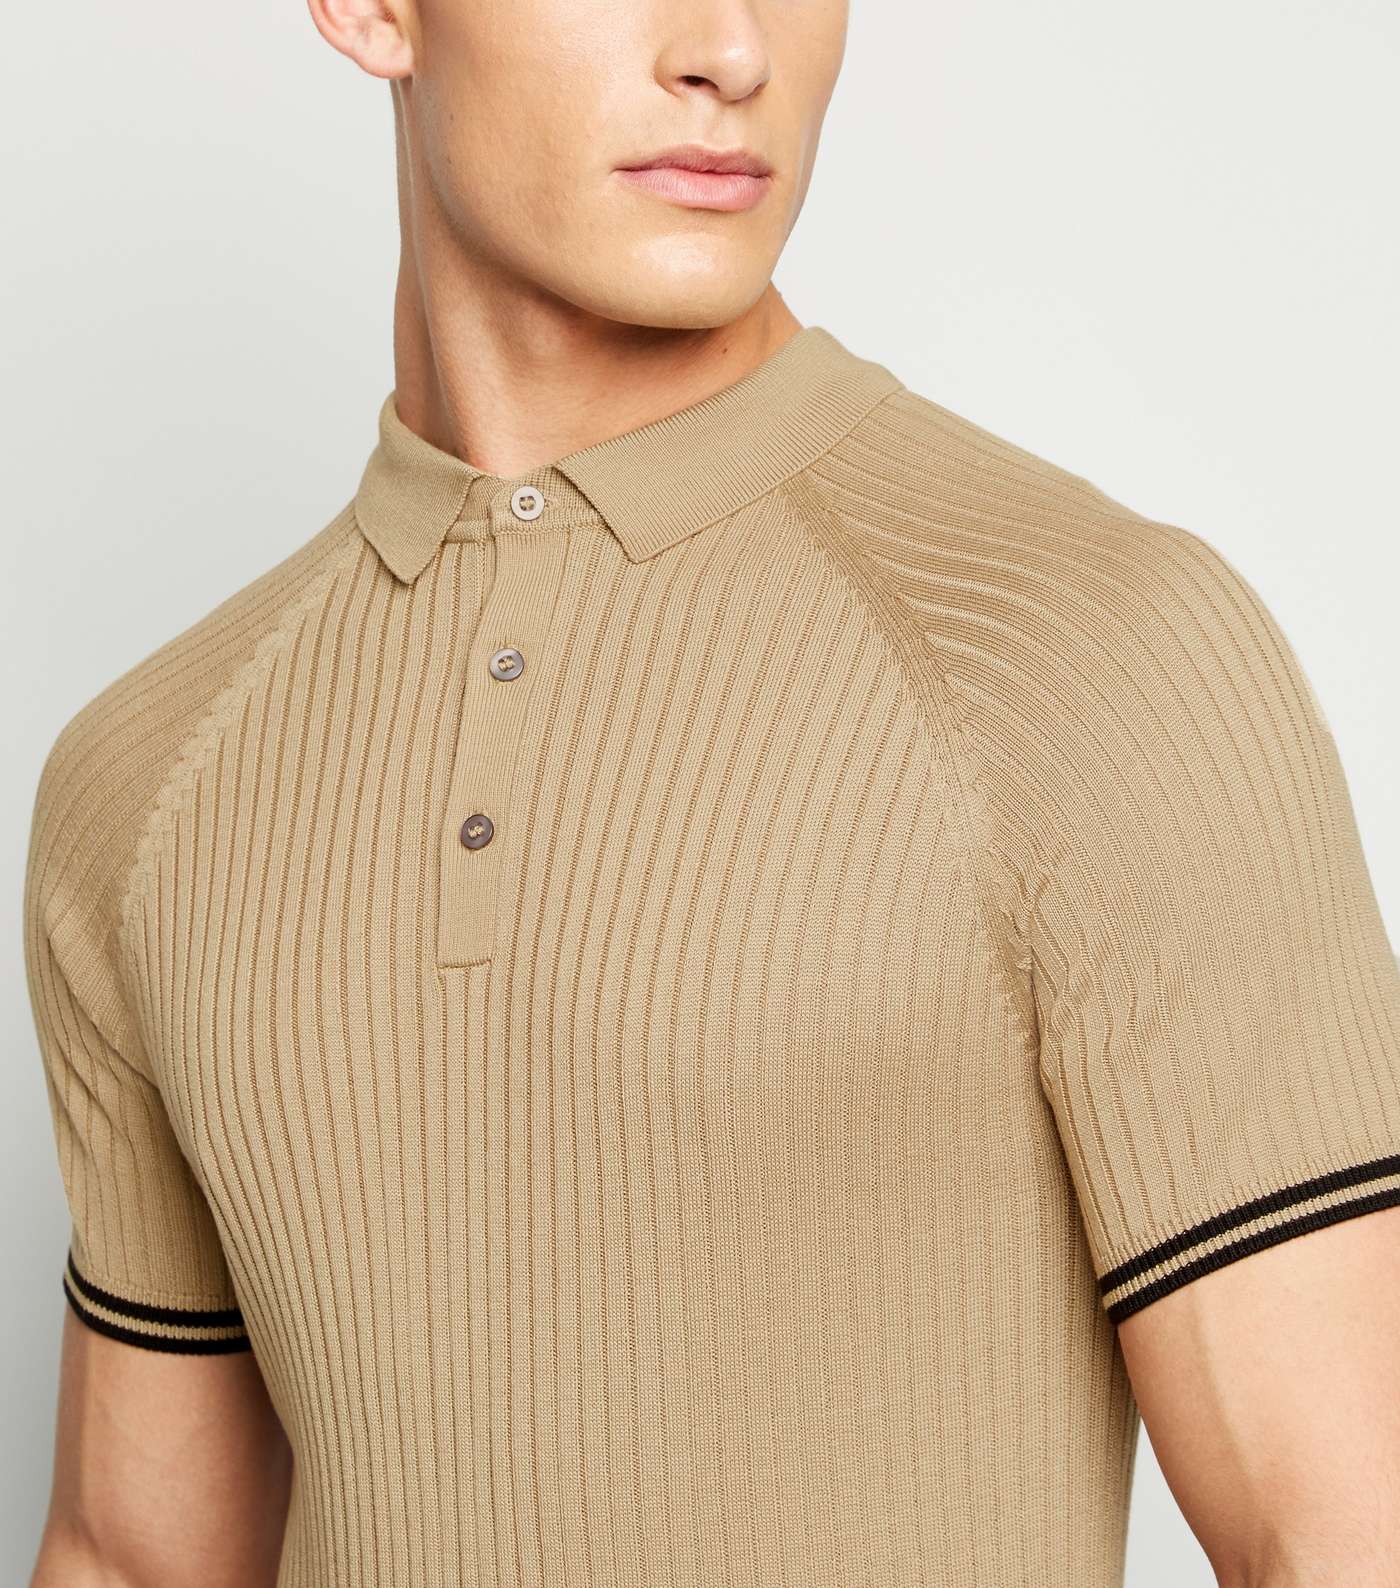 Camel Stripe Sleeve Muscle Fit Polo Shirt Image 5